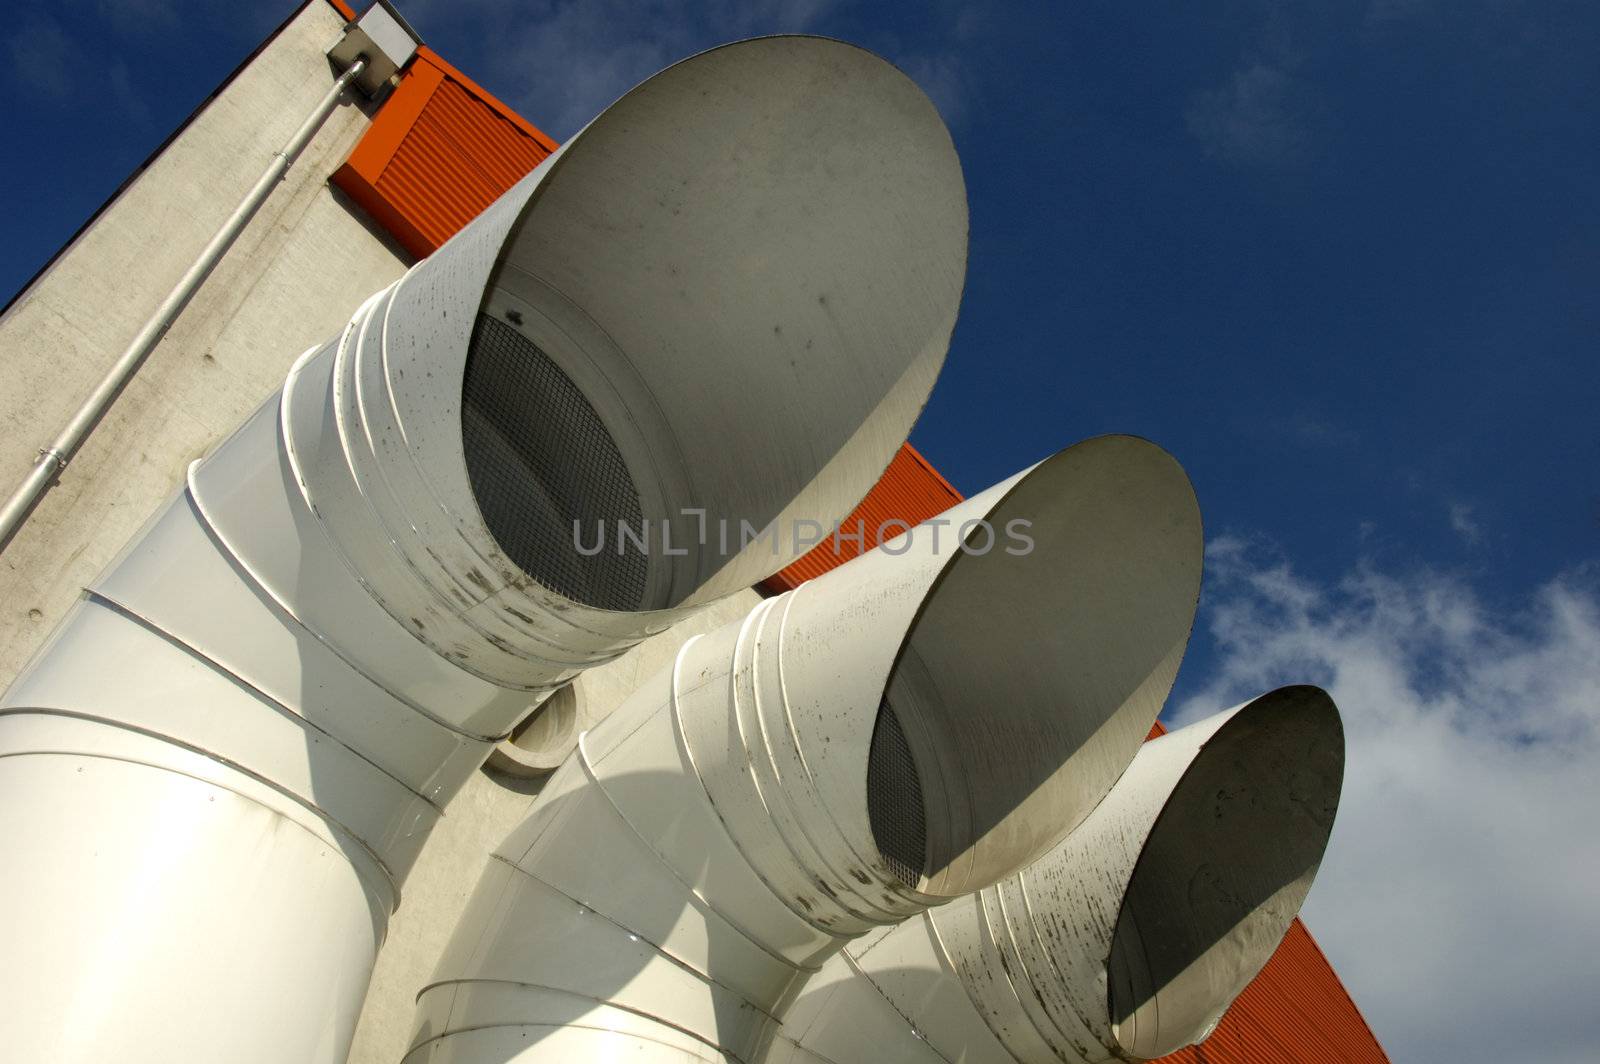 Three industrial ventilation pipes loom large against a blue sky.